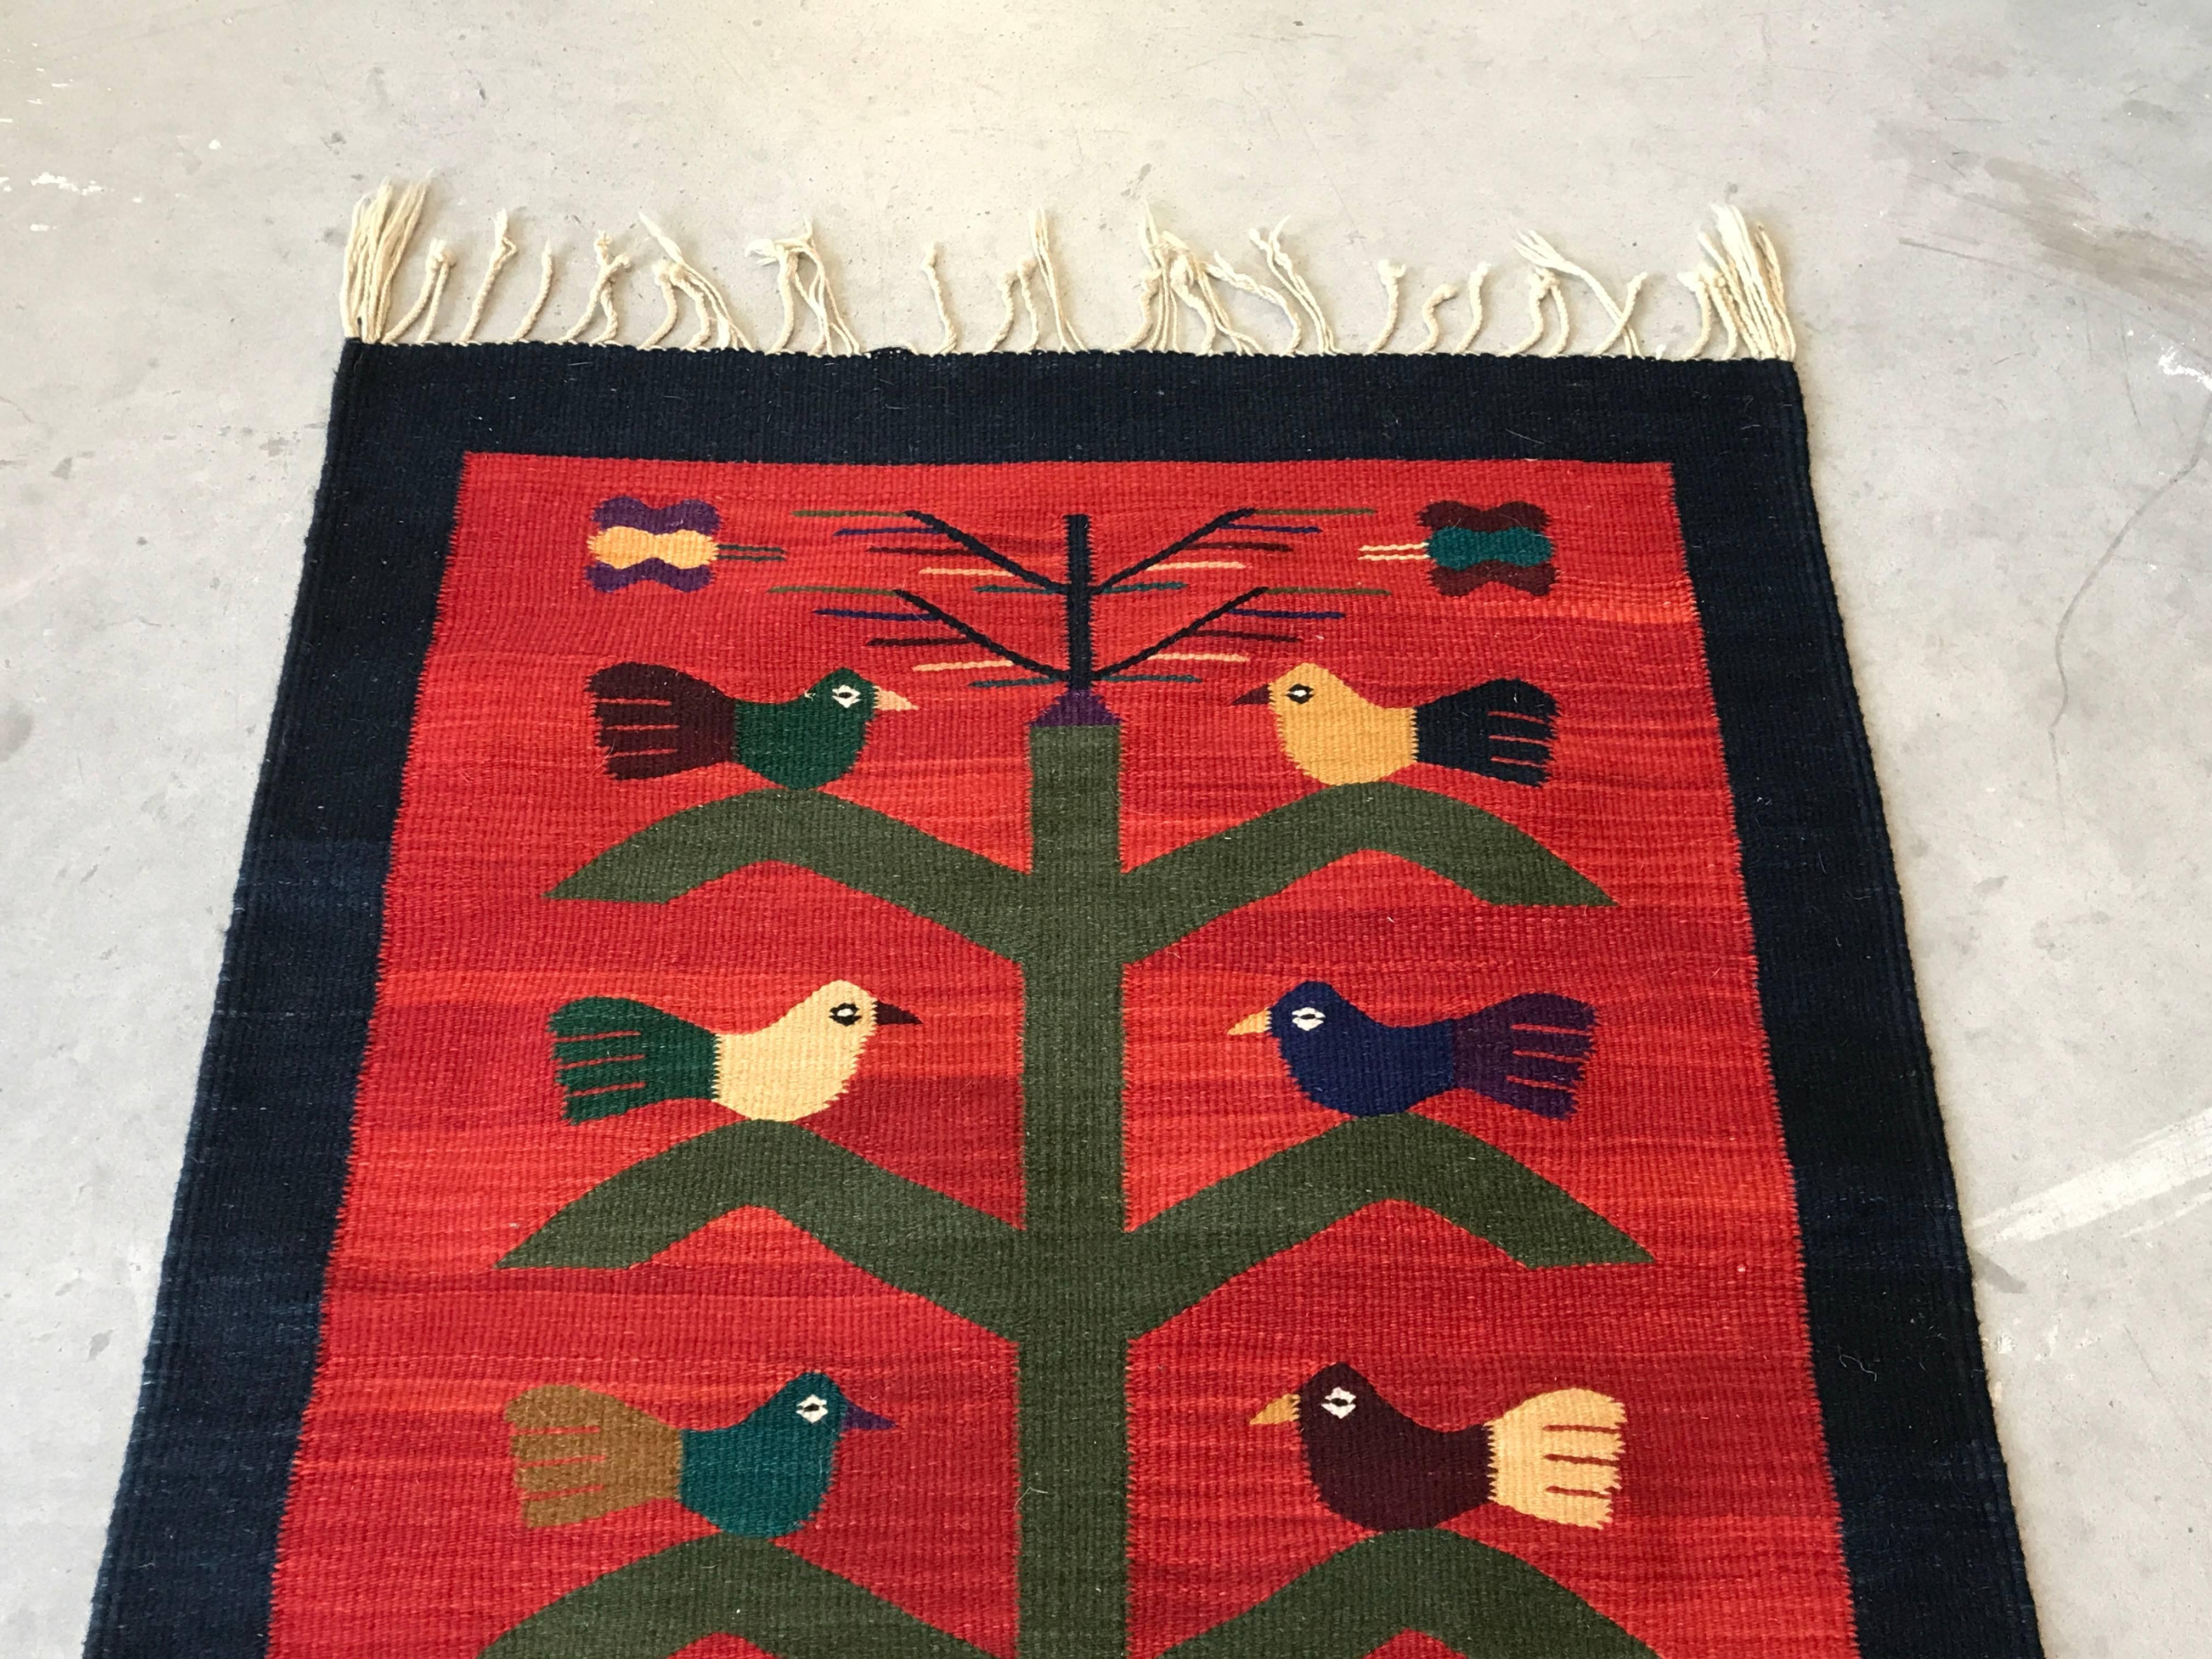 Offered is a fabulous, 1950s red Kilim rug with a polychrome bird and potted plant motif. Some pieces of the fringe needs to be trimmed or re-braided. We suggest a rug pad, or rug tape to prevent slipping.